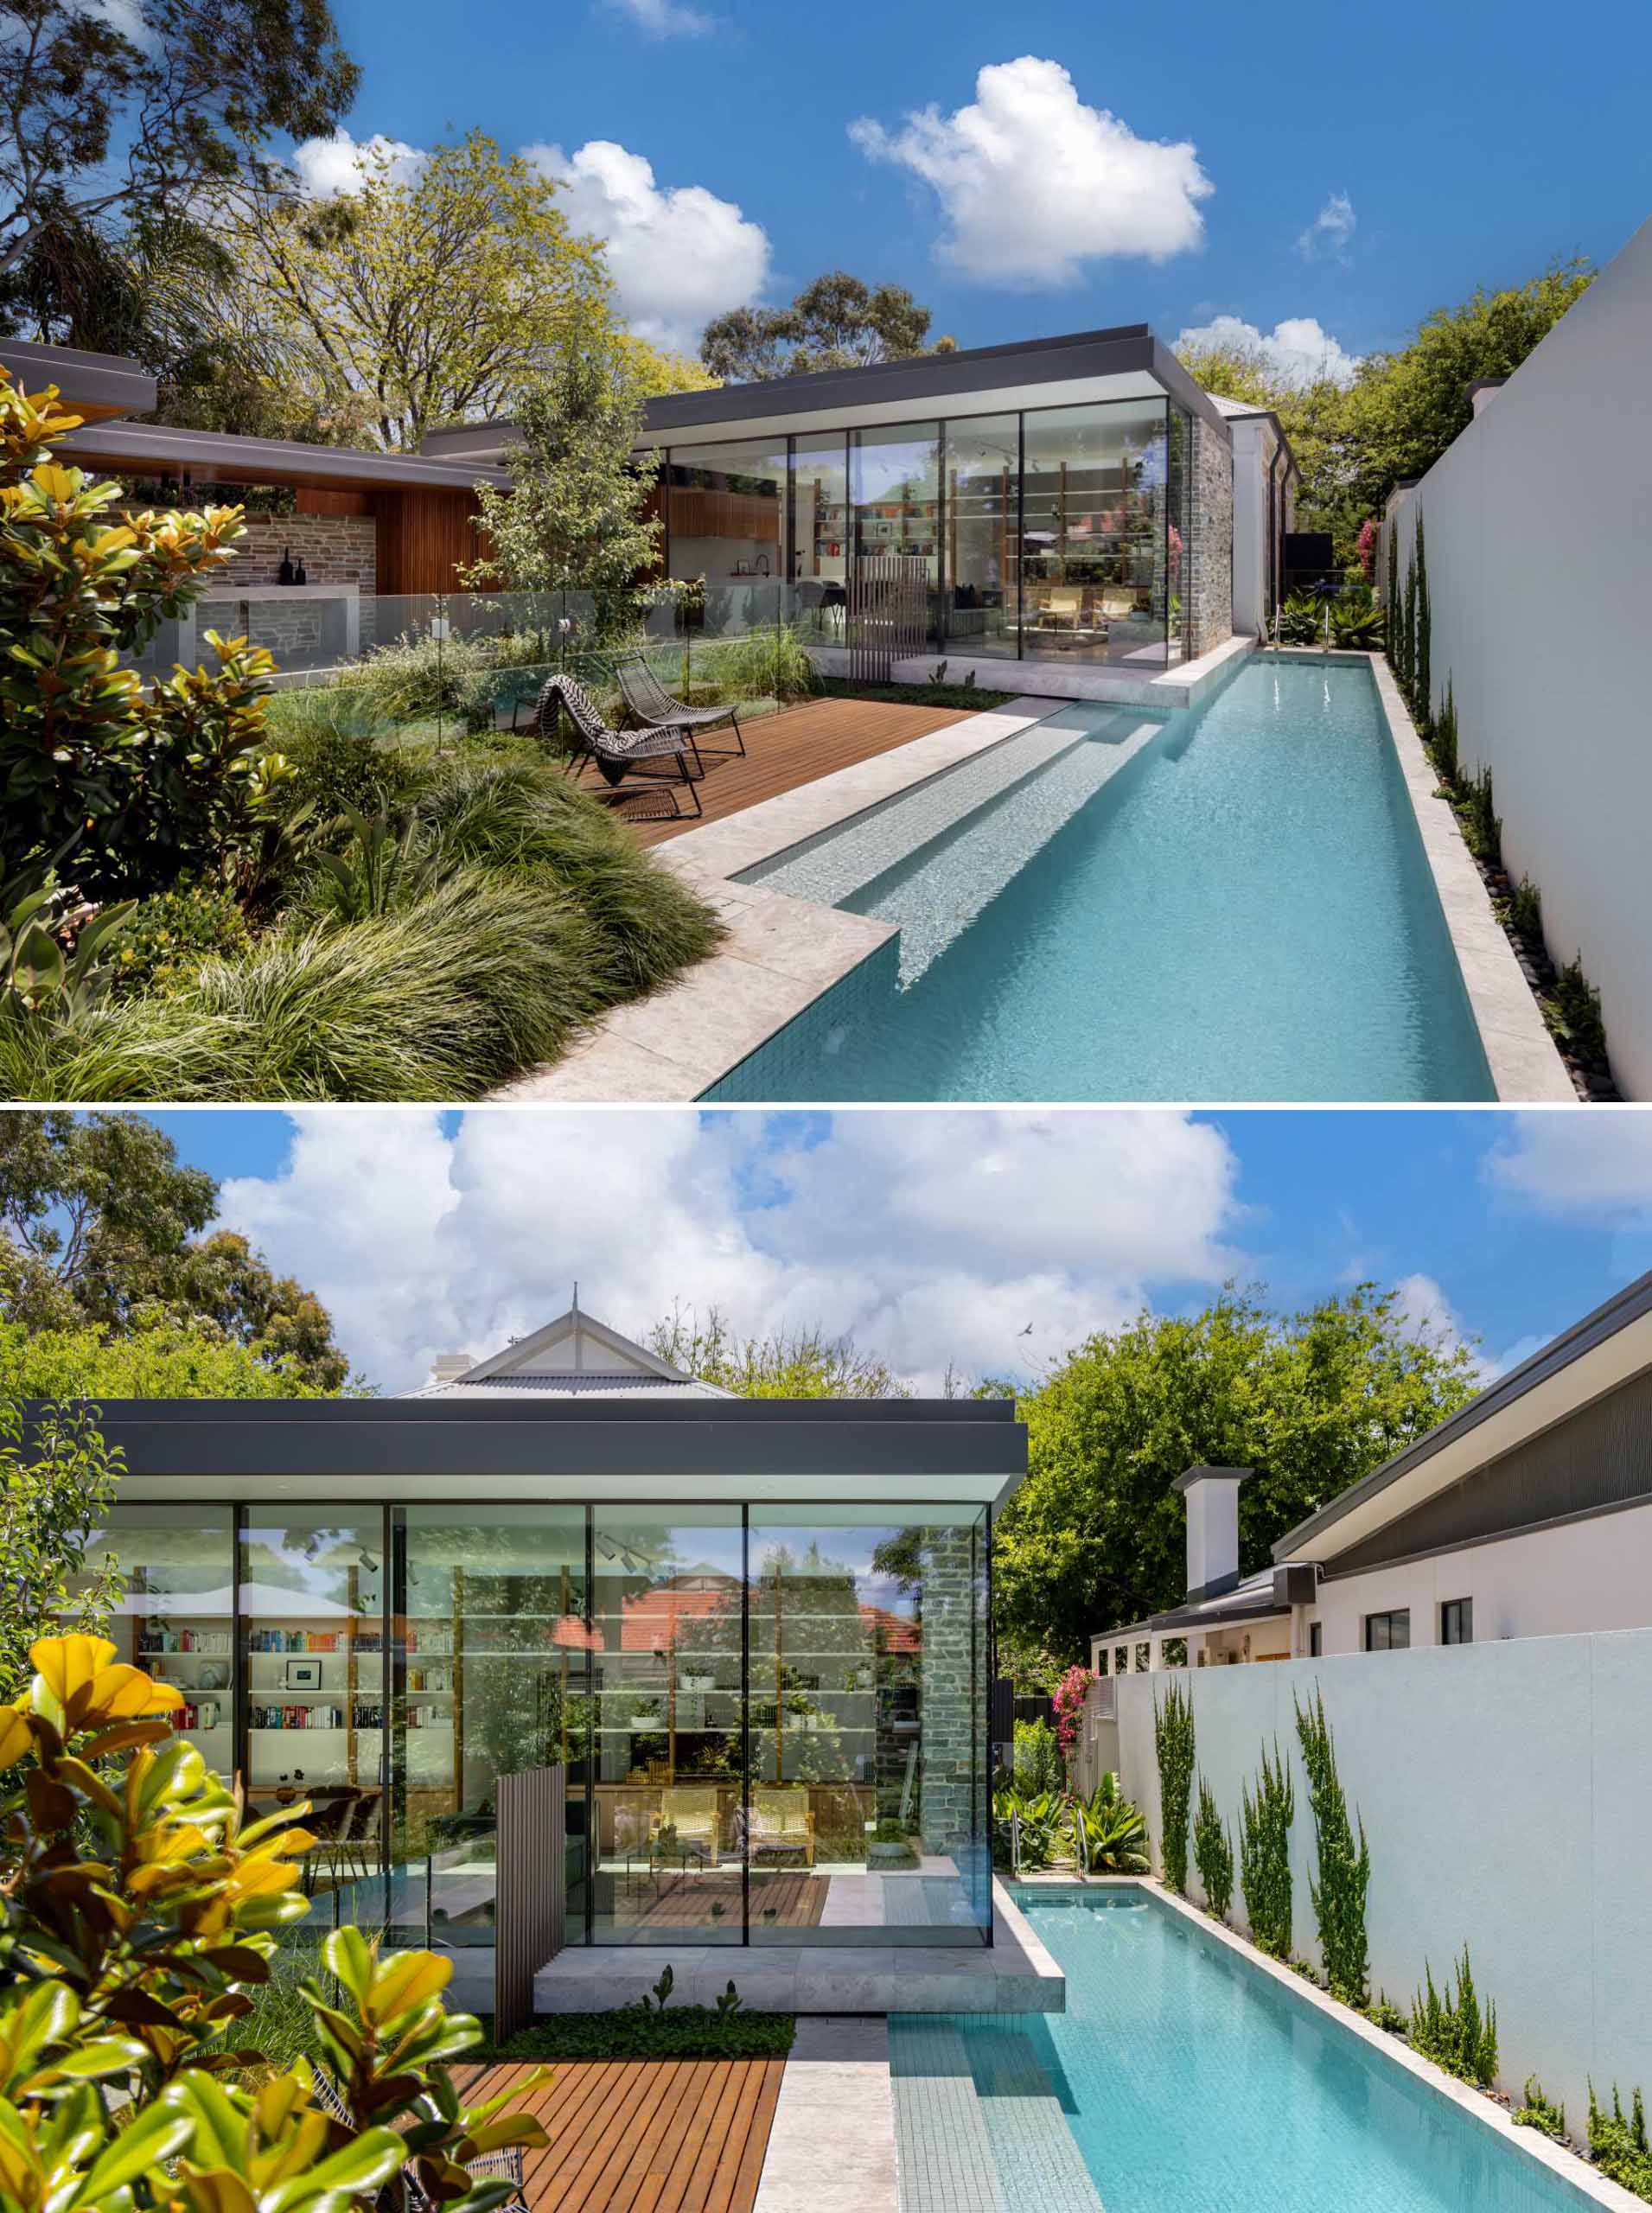 A structured floating box with glass walls has a nearby sunken garden, a patio, and a rectangular pool.